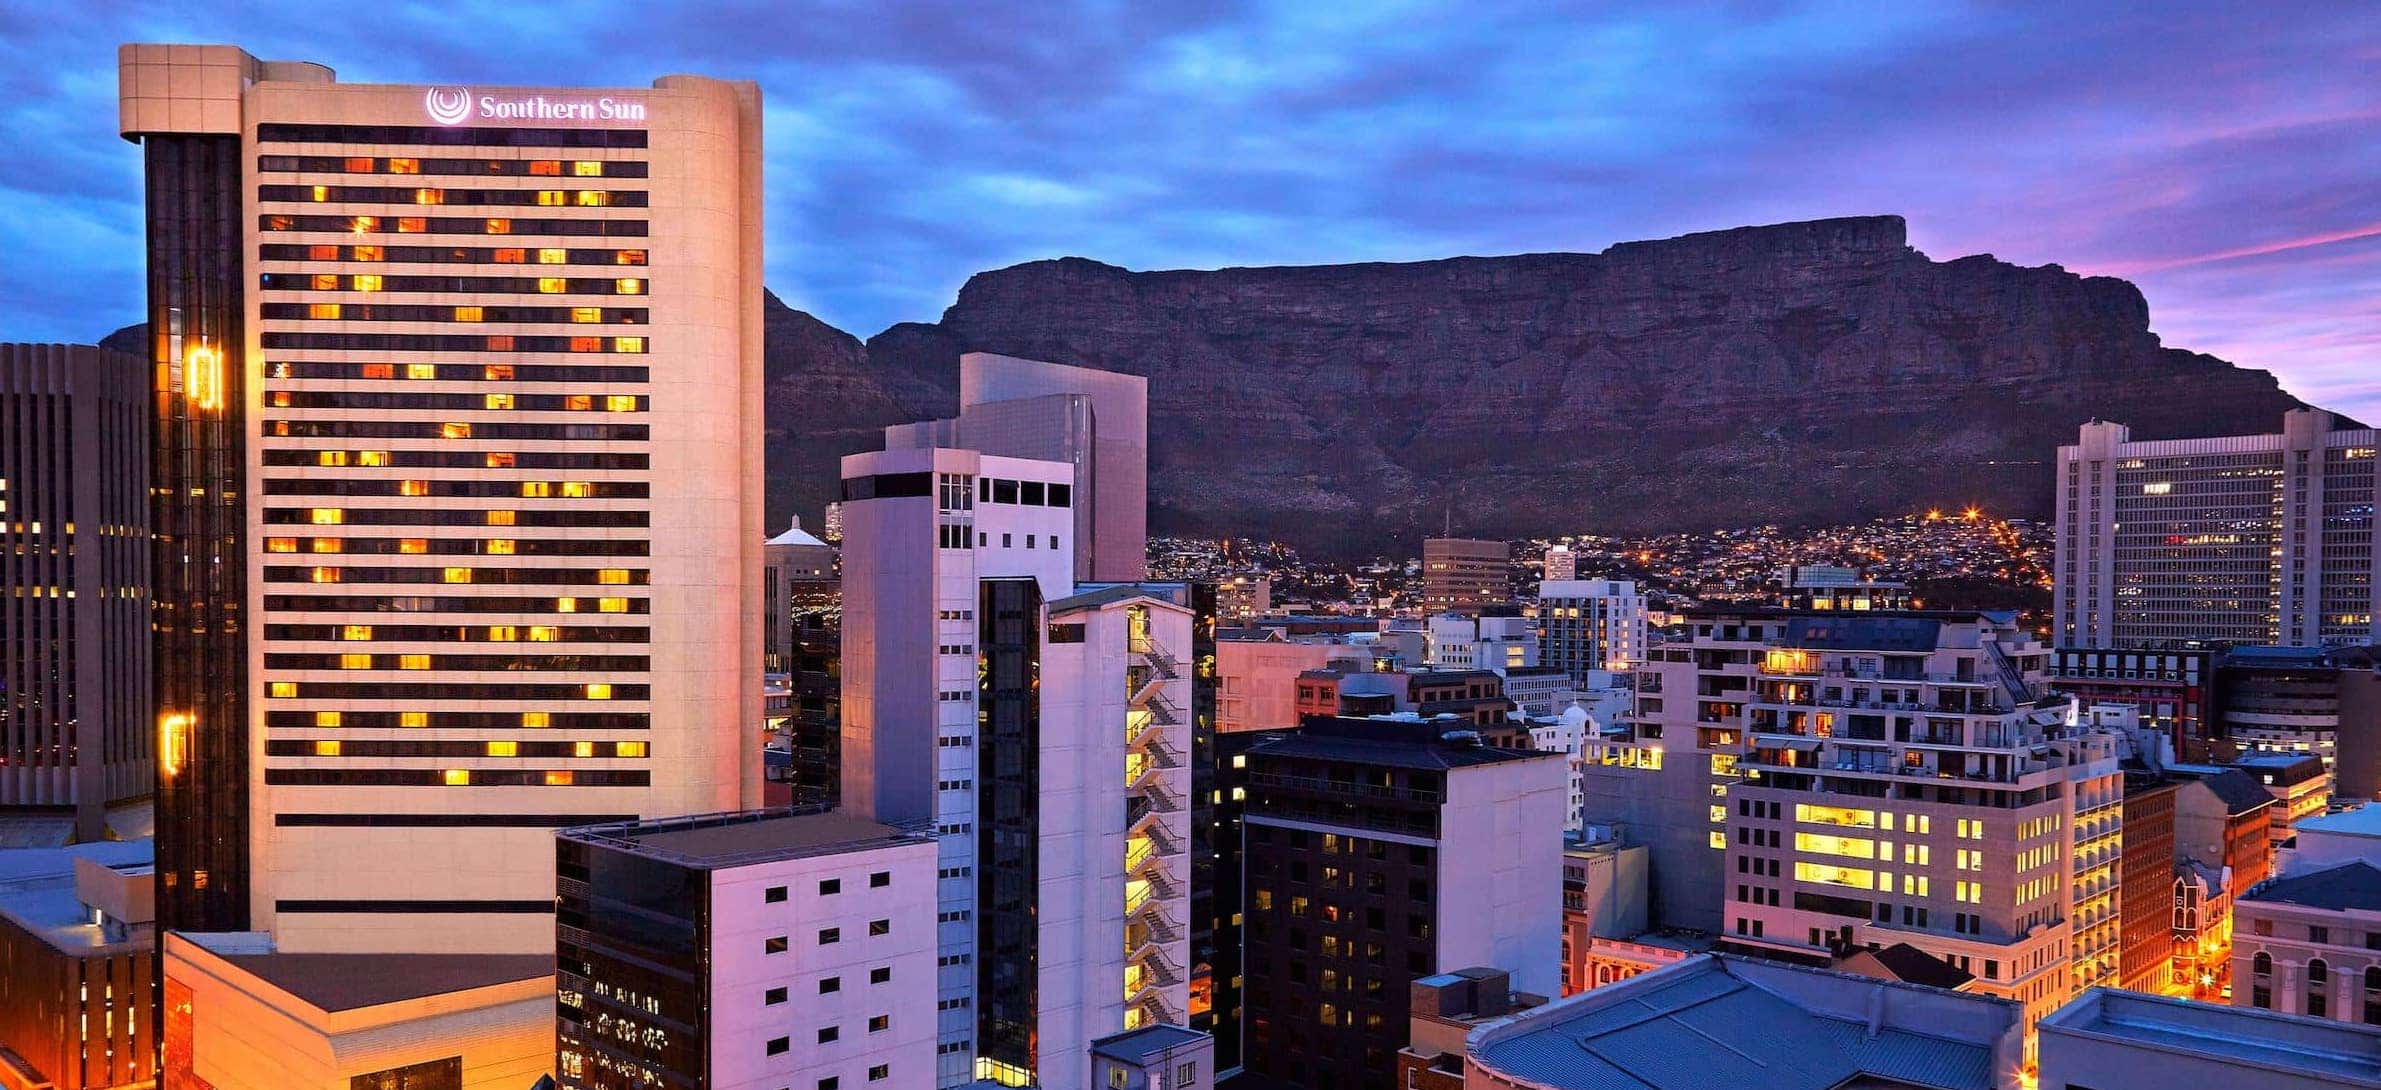 Southern sun hotel group to make rugby world cup sevens 2022 feel at home in cape town